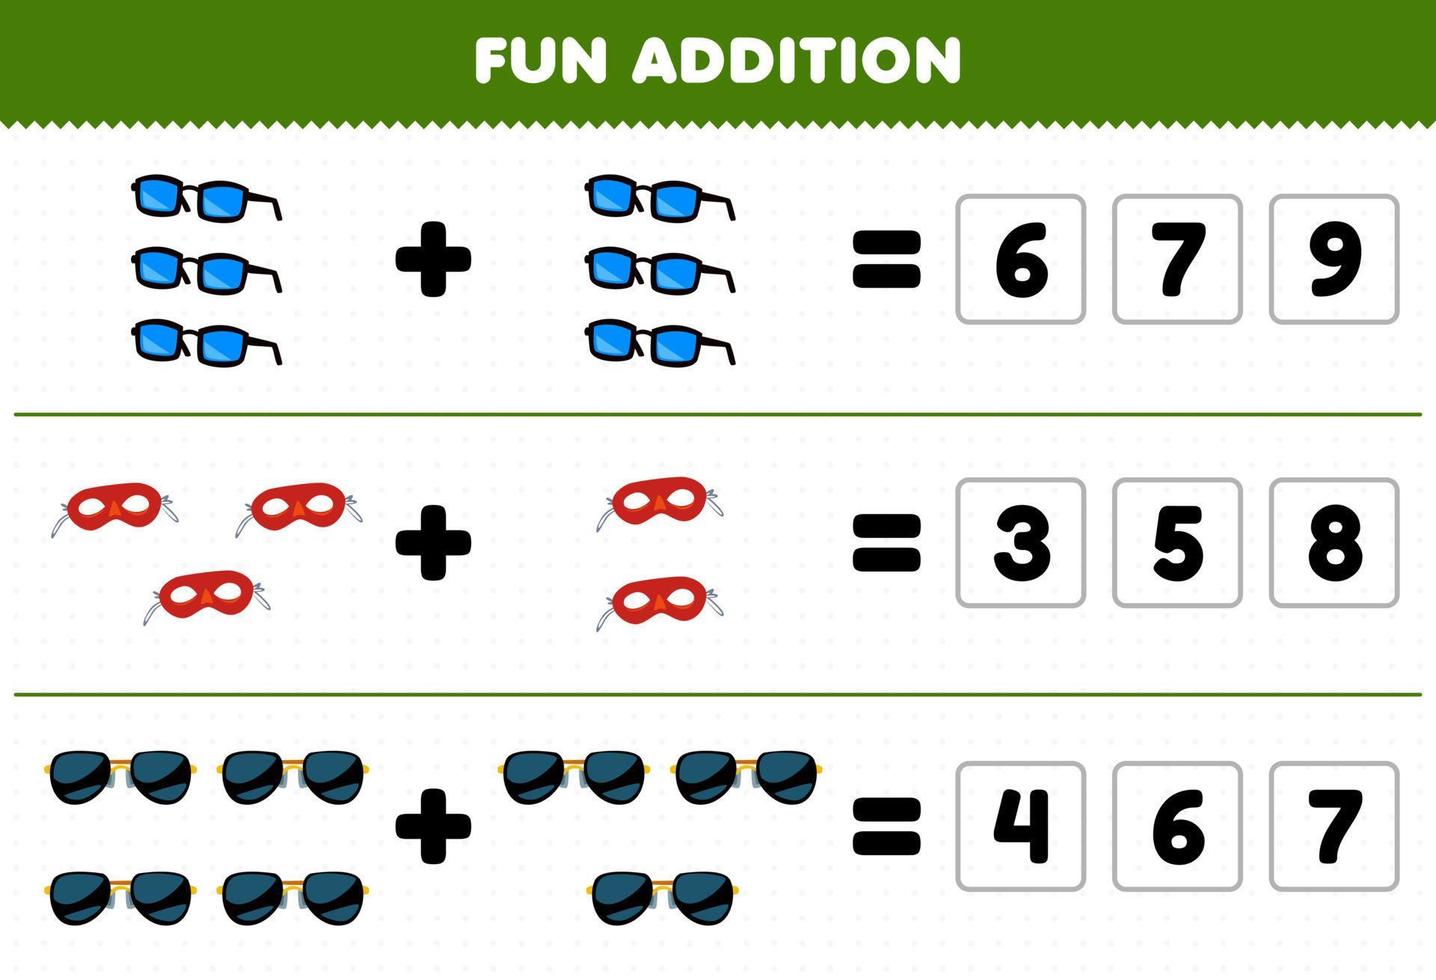 Education game for children fun addition by guess the correct number of wearable accessories glasses mask sunglasses printable worksheet vector